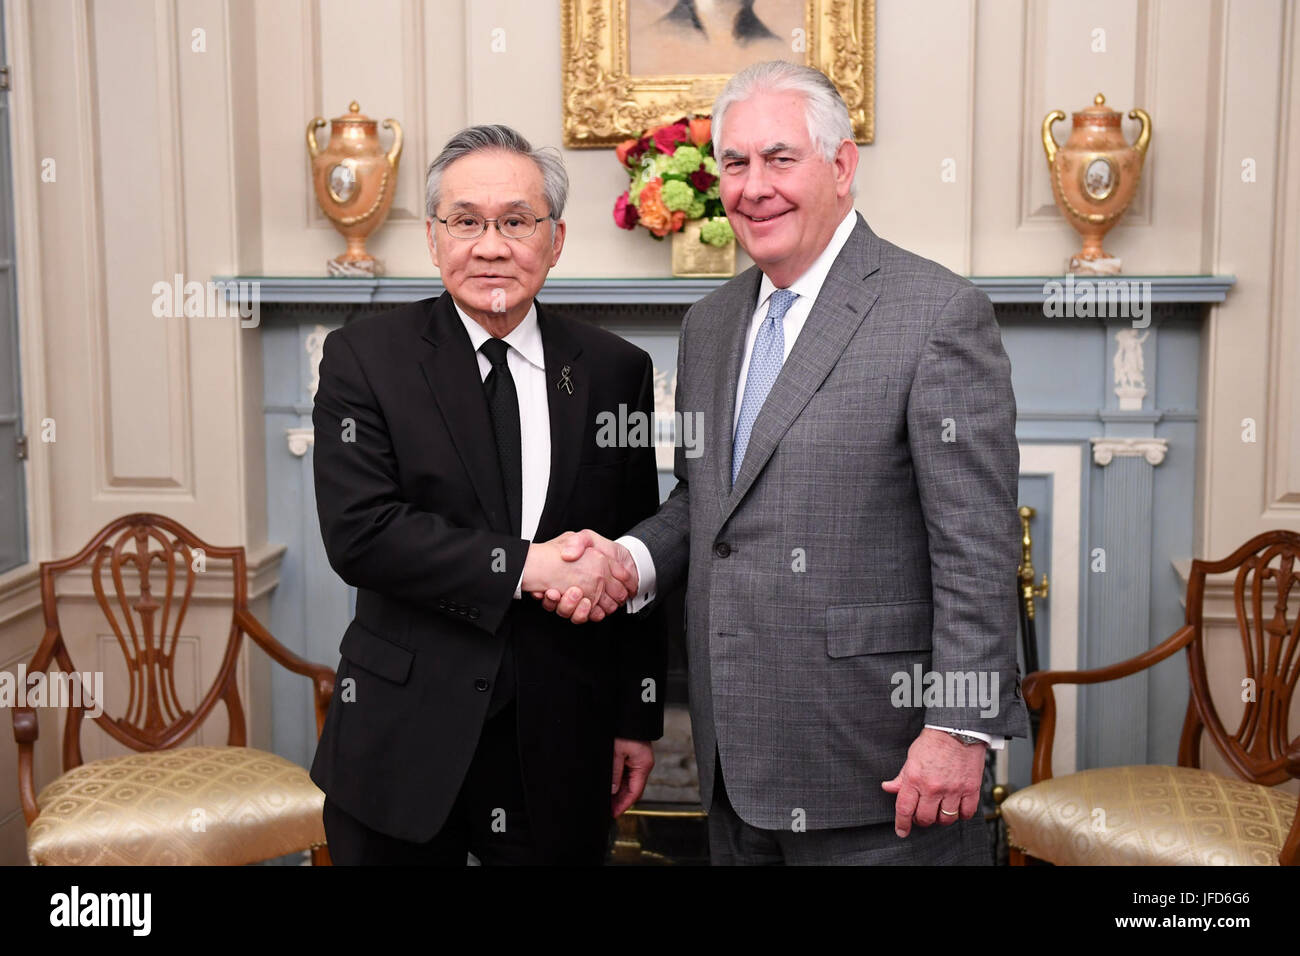 U.S. Secretary of State Rex Tillerson poses for a photo with Thai Foreign Minister Don Pramudwinai before their bilateral meeting at the U.S. Department of State in Washington, D.C., on May 4, 2017. Stock Photo